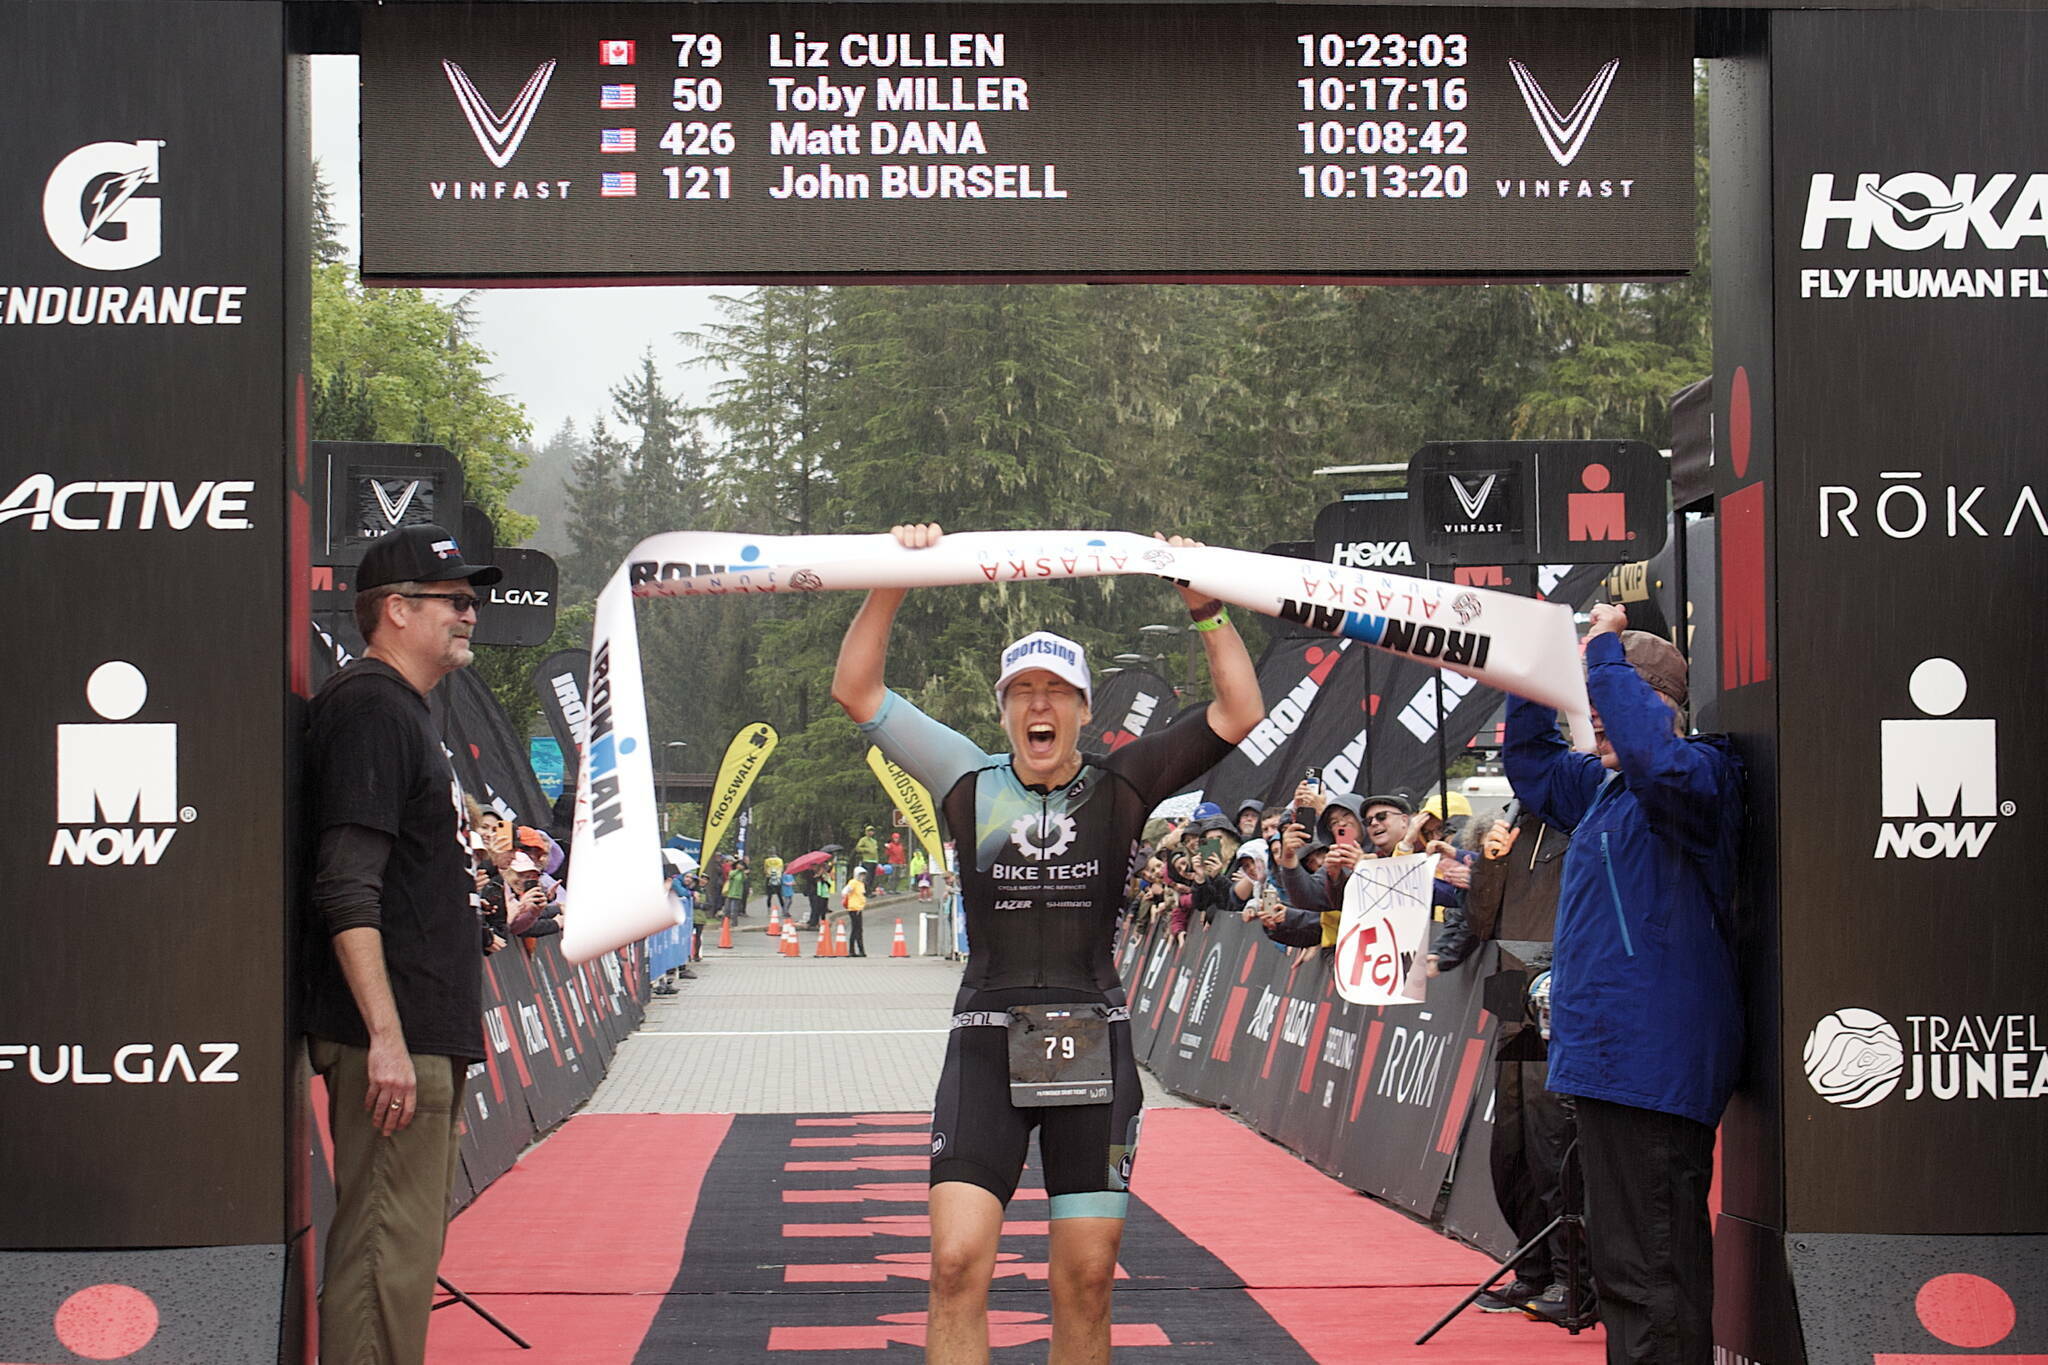 Liz Cullen of West Vancouver celebrates after finishing with the top woman’s time in Ironman Alaska on Aug. 7. About 850 athletes plus other visitors brought about $7 million to Juneau’s economy during what was supposed to be the first of three annual triathlons, but the subsequent two years were cancelled due to what race officials called economic concerns. (Mark Sabbatini / Juneau Empire)(Mark Sabbatini / Juneau Empire)